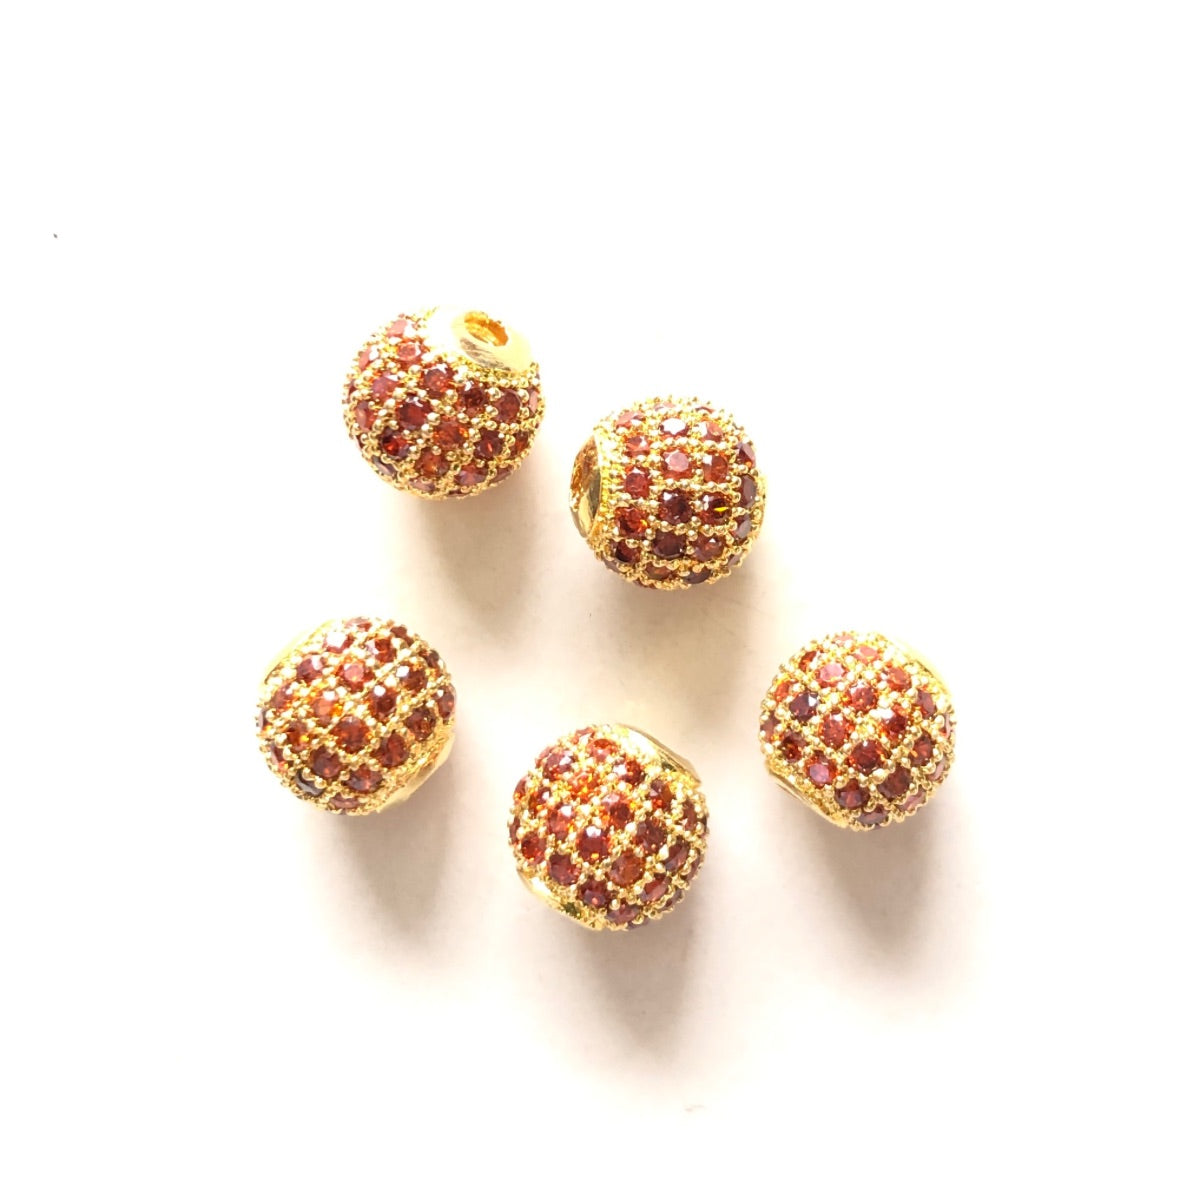 10pcs/lot 6mm, 8mm Colorful CZ Paved Ball Spacers Gold Reddish Orange CZ Paved Spacers 6mm Beads 8mm Beads Ball Beads Colorful Zirconia New Spacers Arrivals Charms Beads Beyond